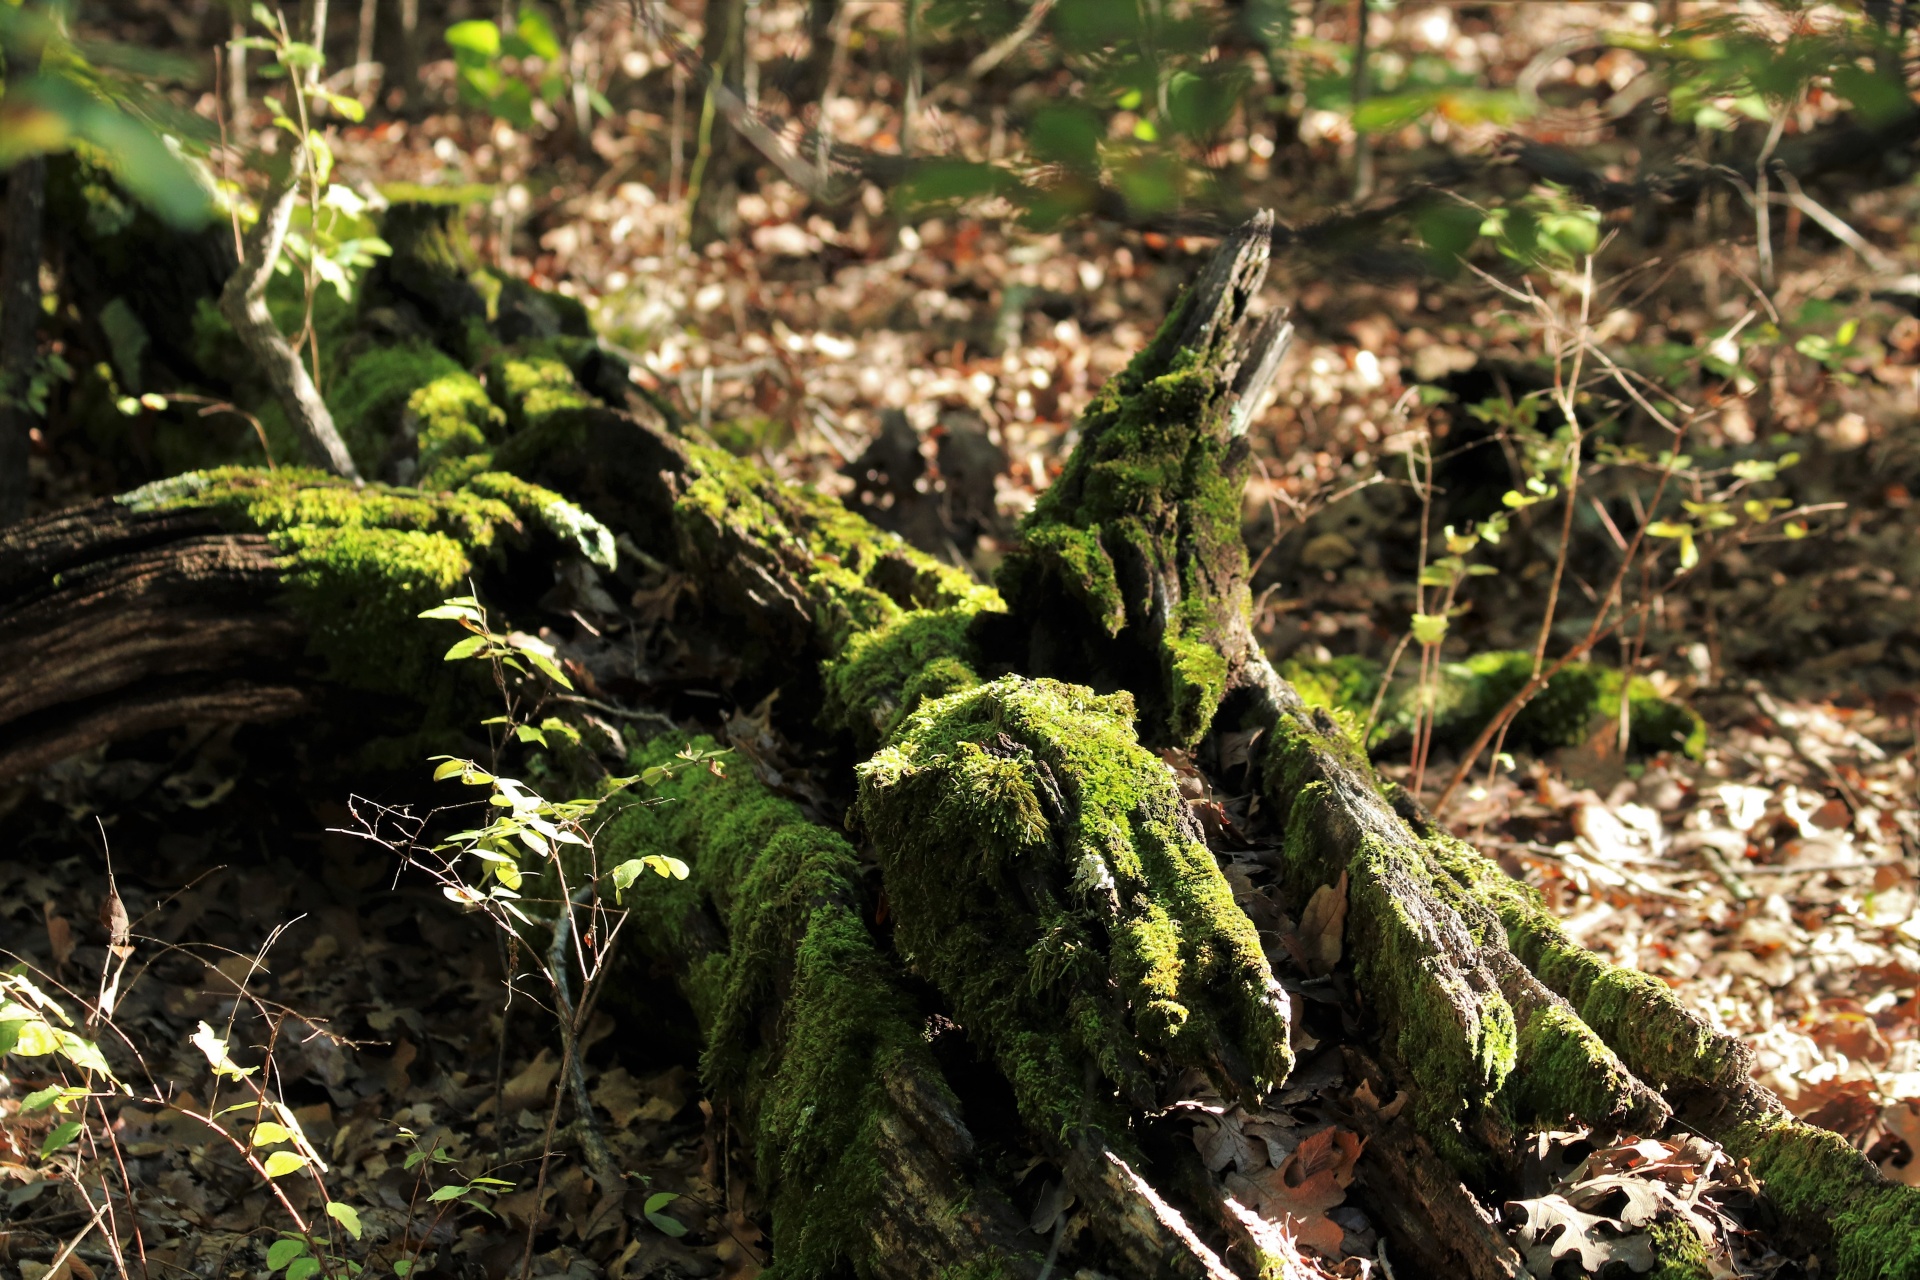 Moss Covered Log In The Woods